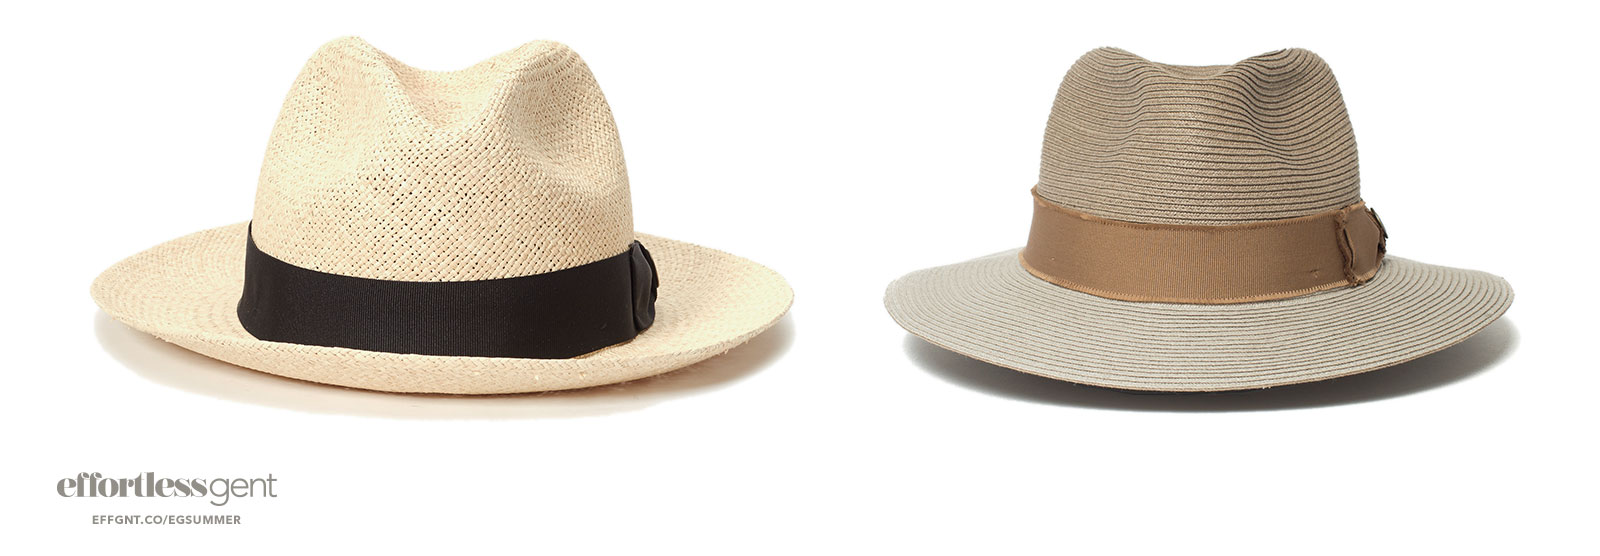 mens summer hats and fedoras